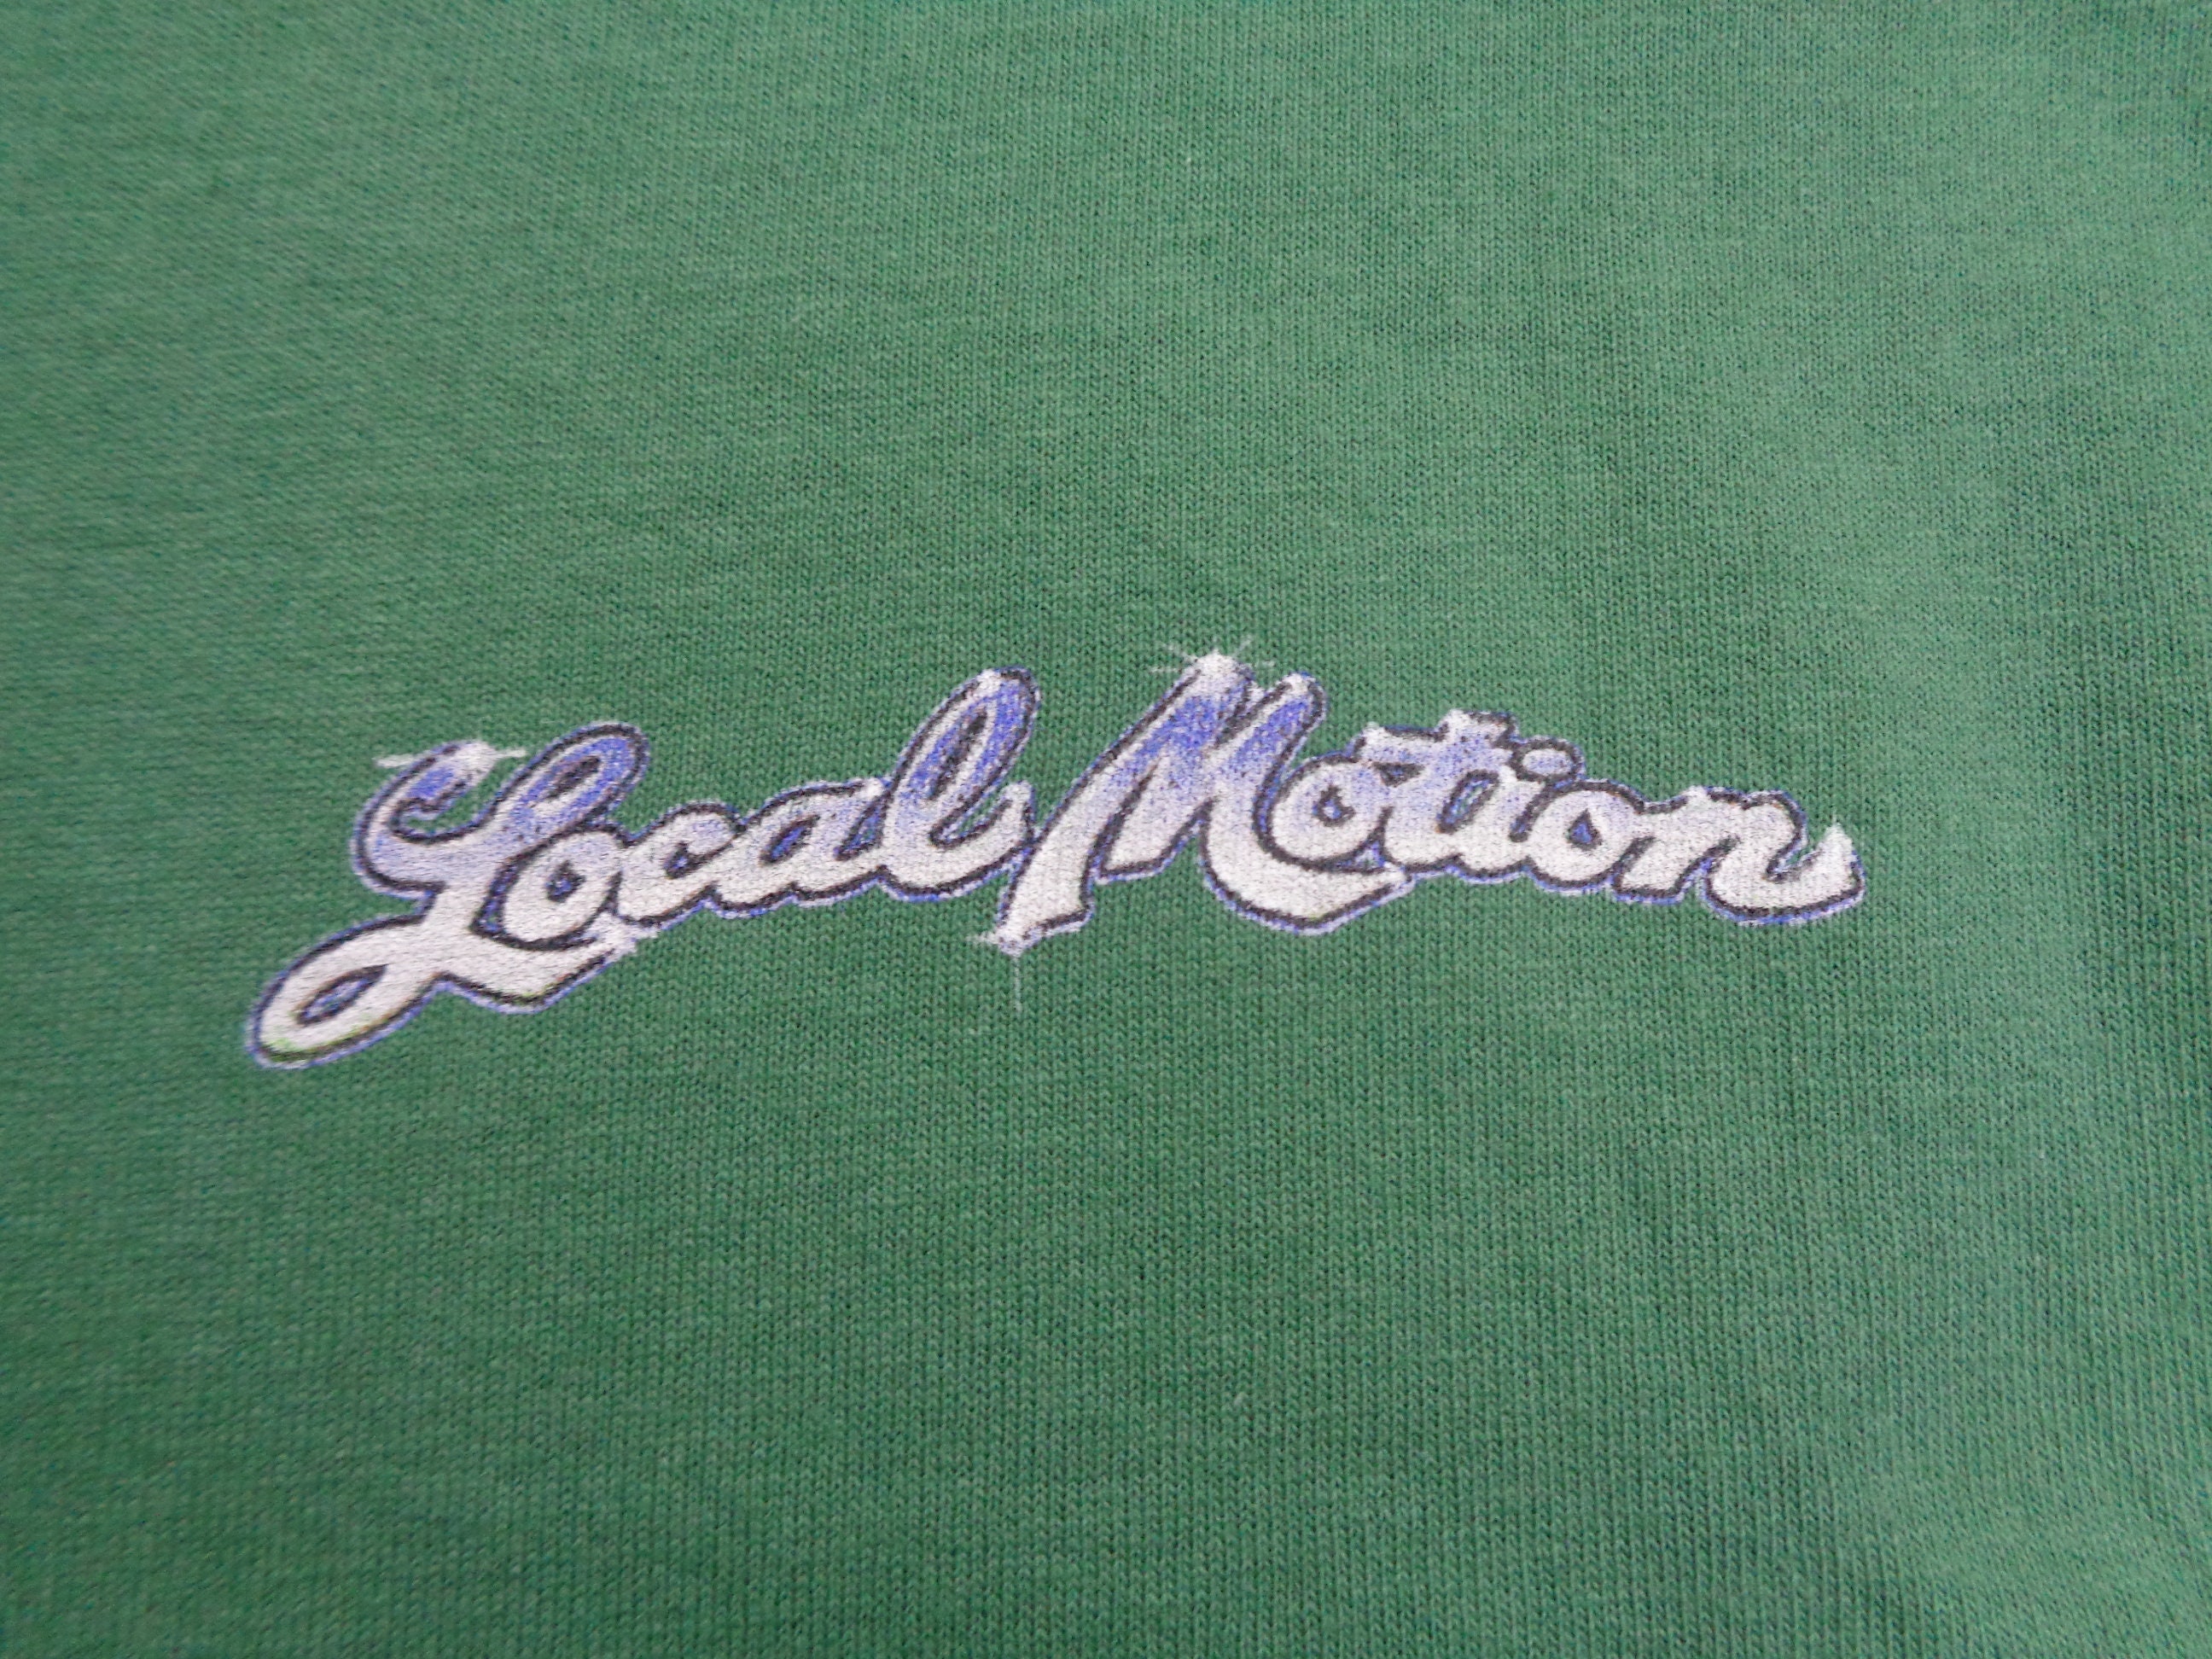 Local Motion Shirt Vintage Local Motion T Shirt Vintage Local | Etsy